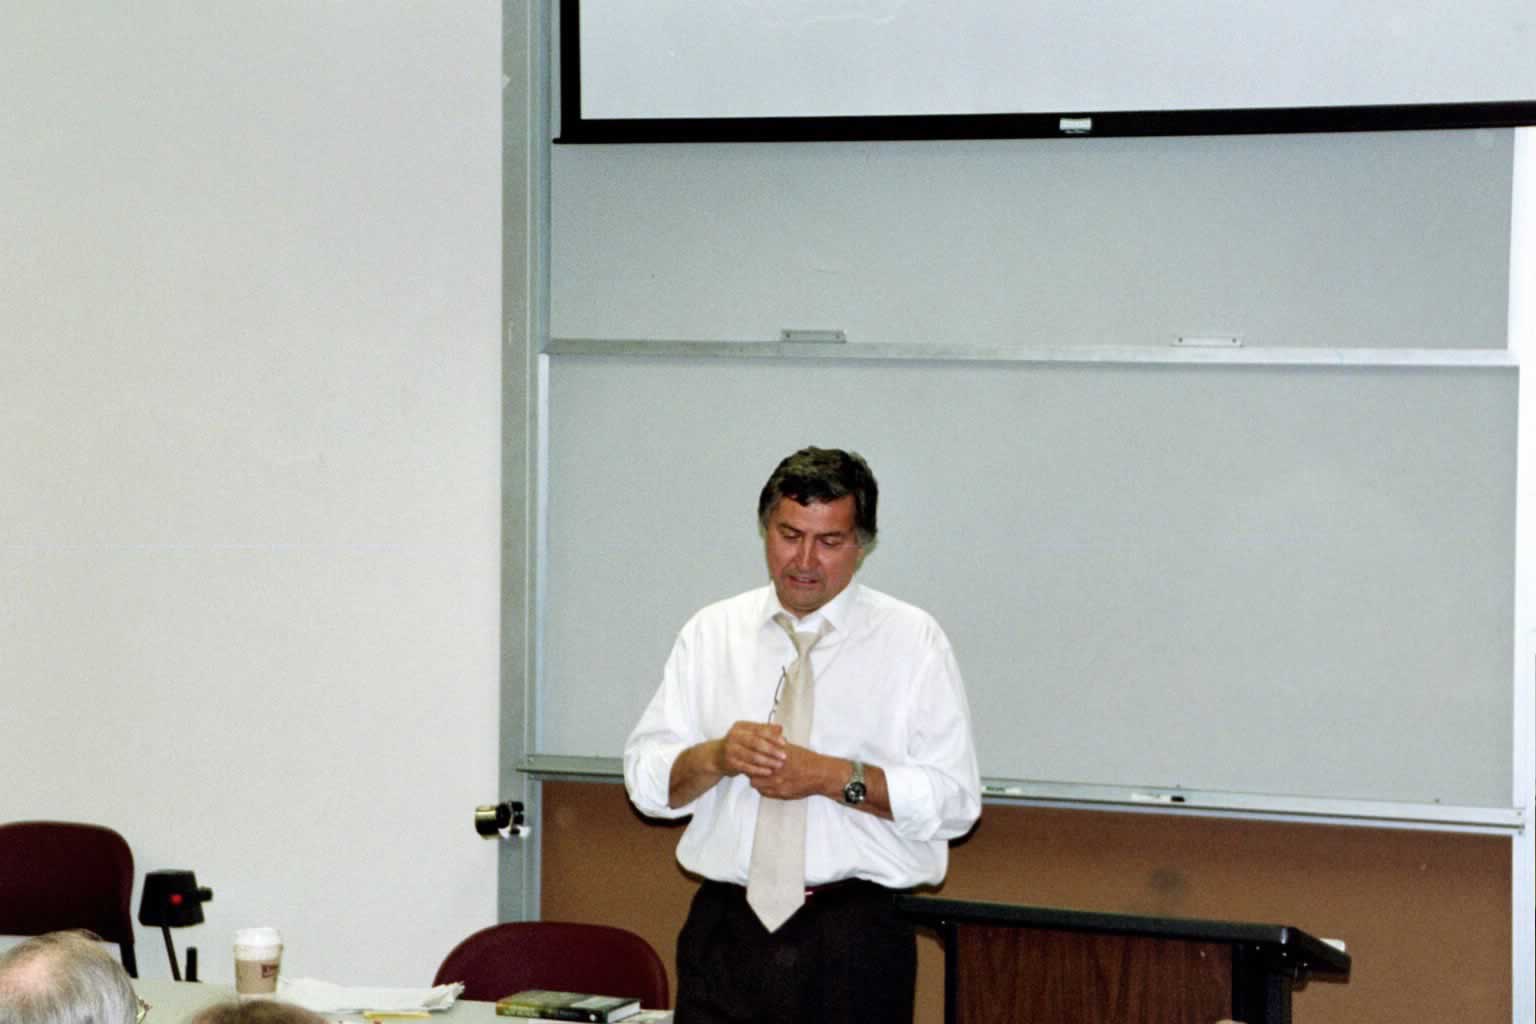 picture of Paul Marshall standing in front of a room speaking